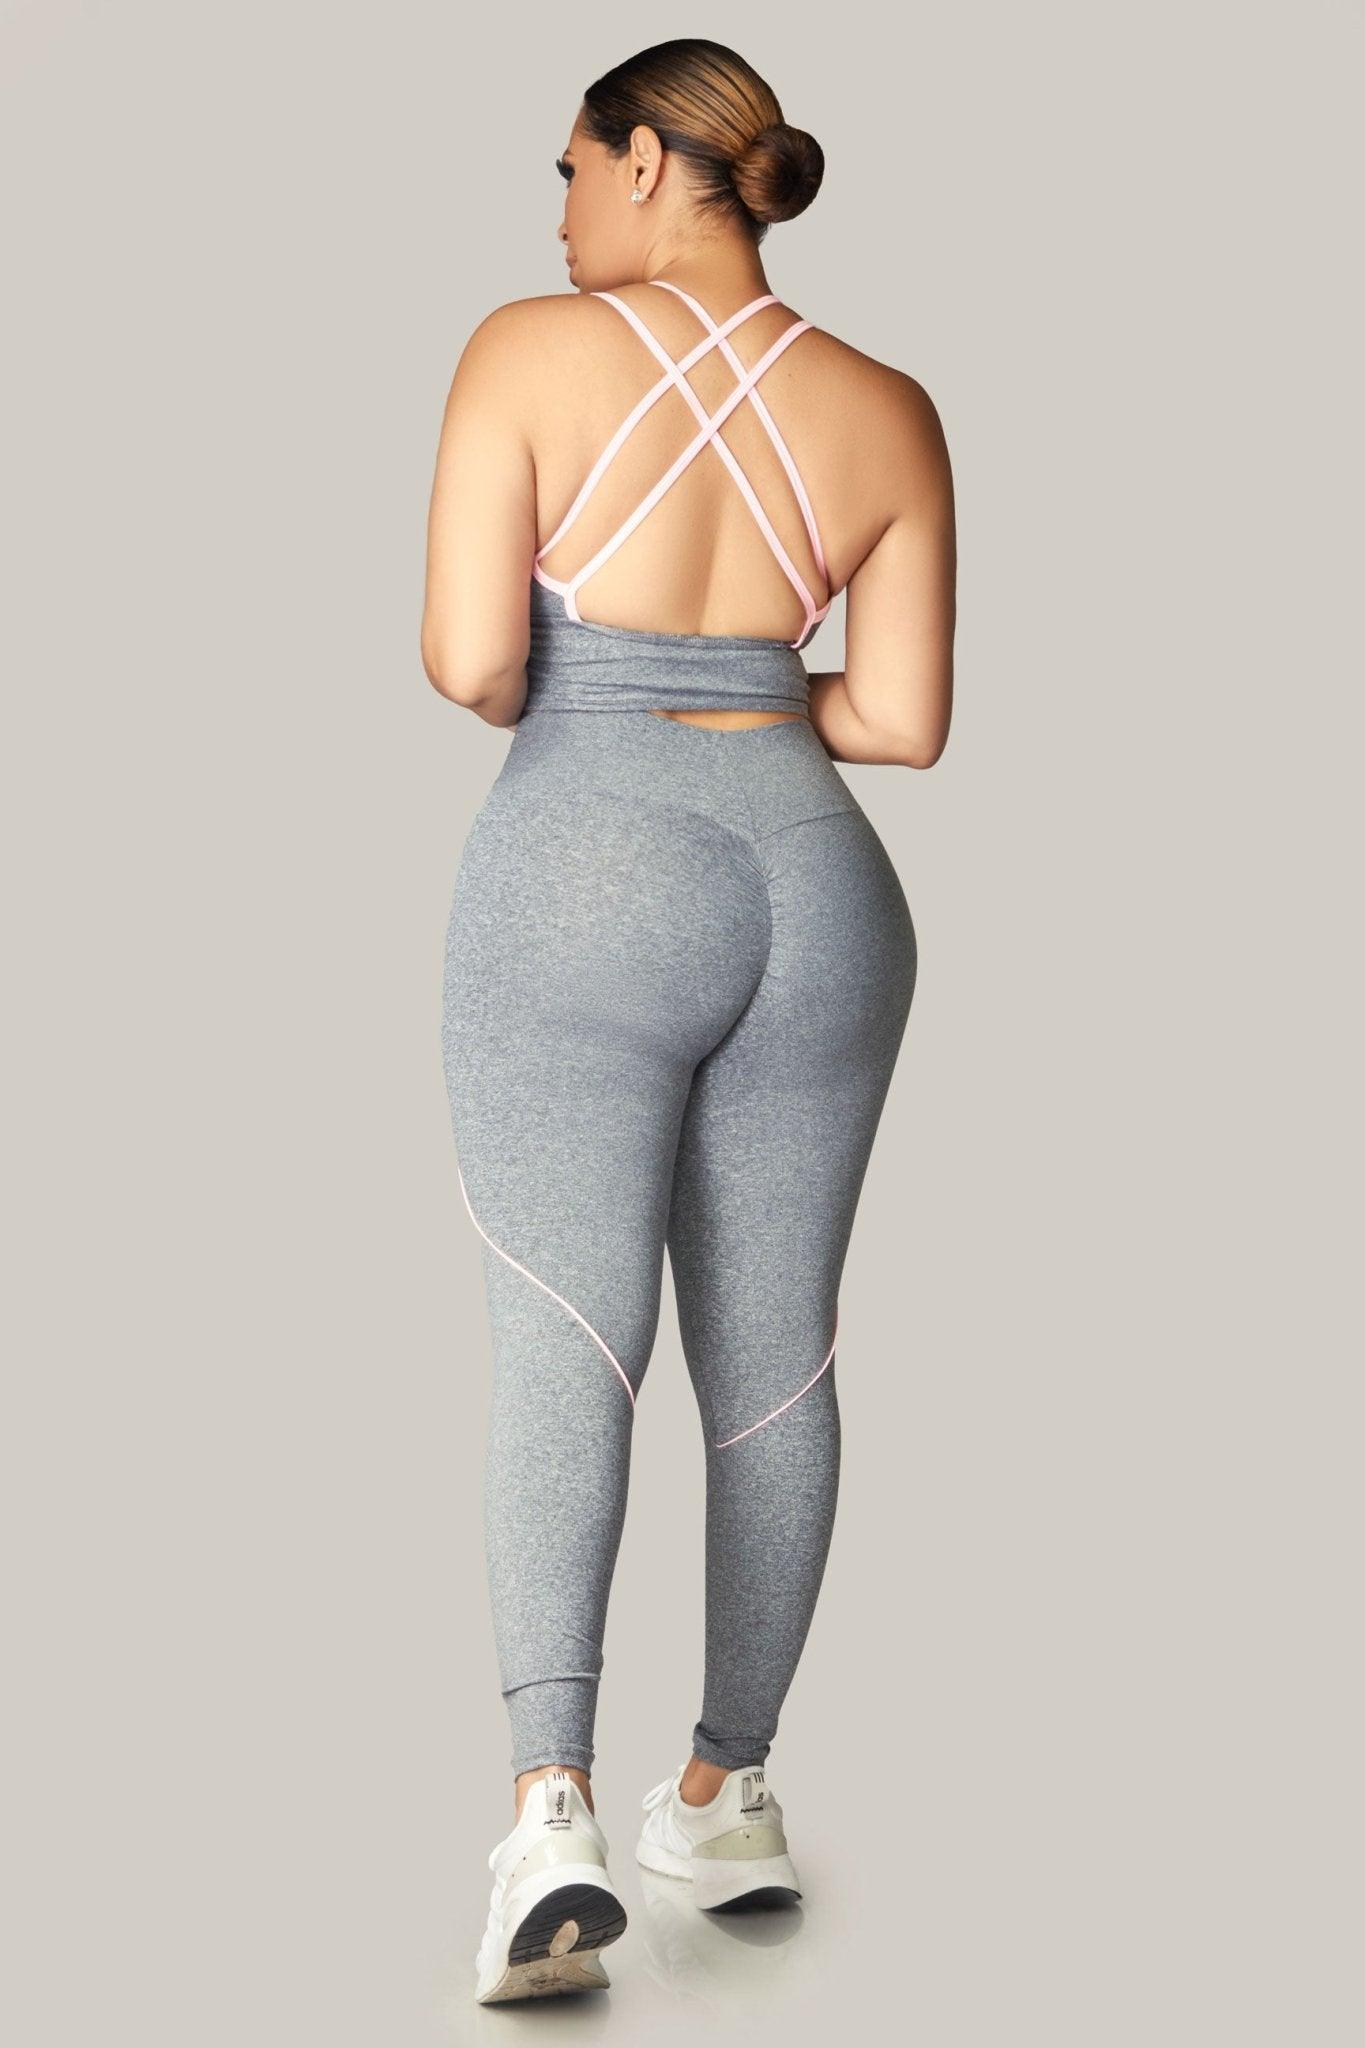 Asher High-Waisted Leggings and Sport Bra Set - MY SEXY STYLES